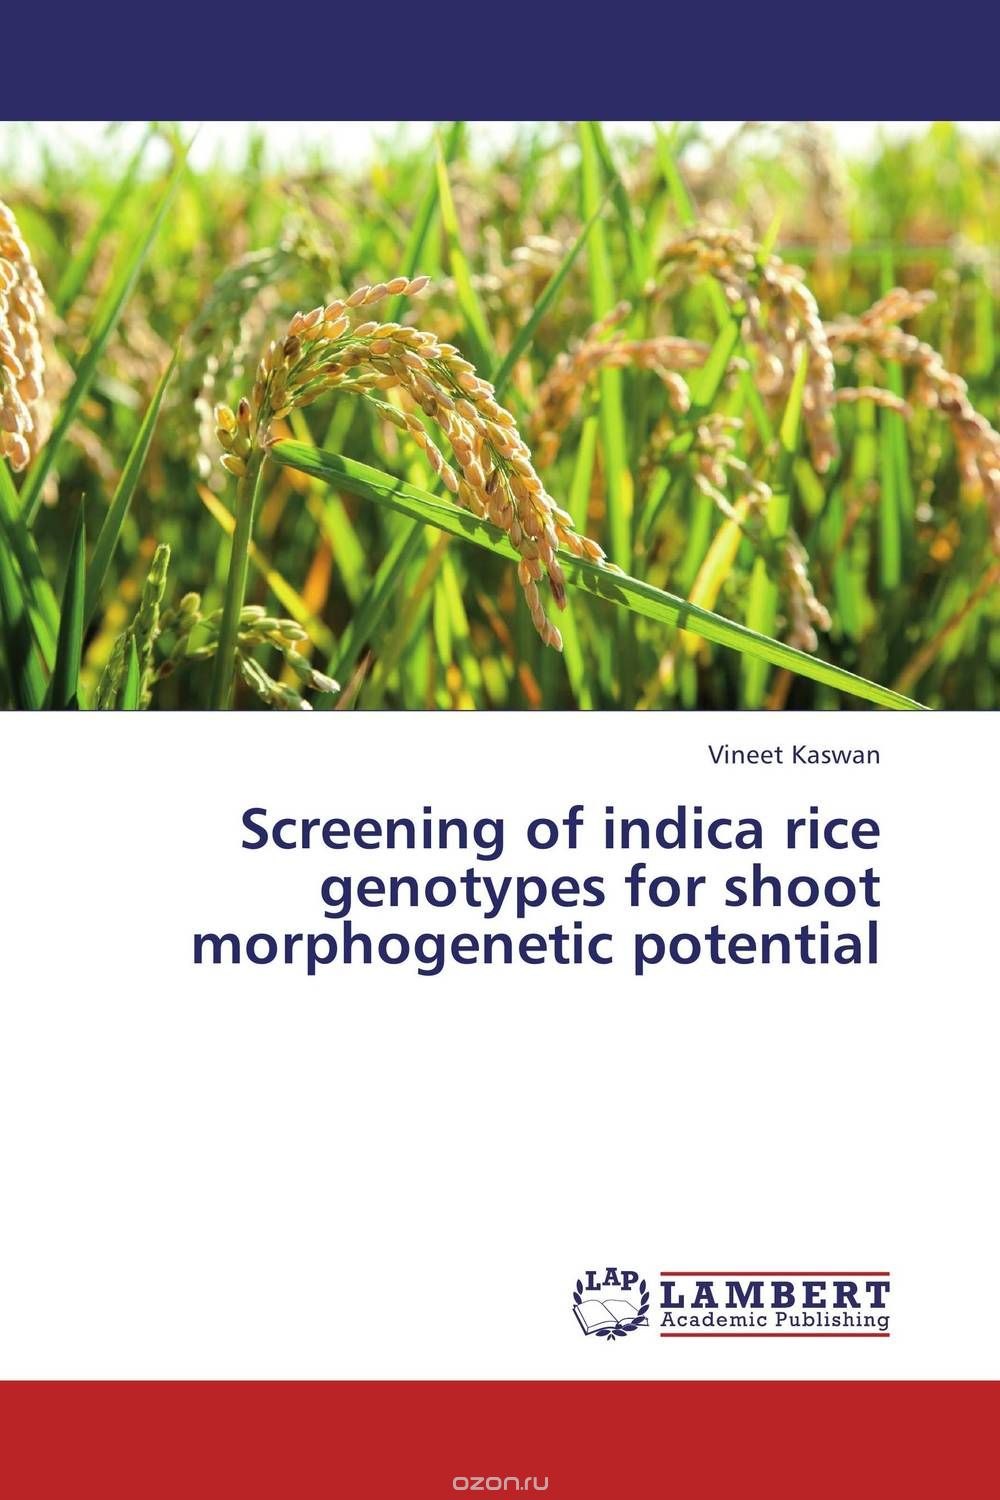 Screening of indica rice genotypes for shoot morphogenetic potential